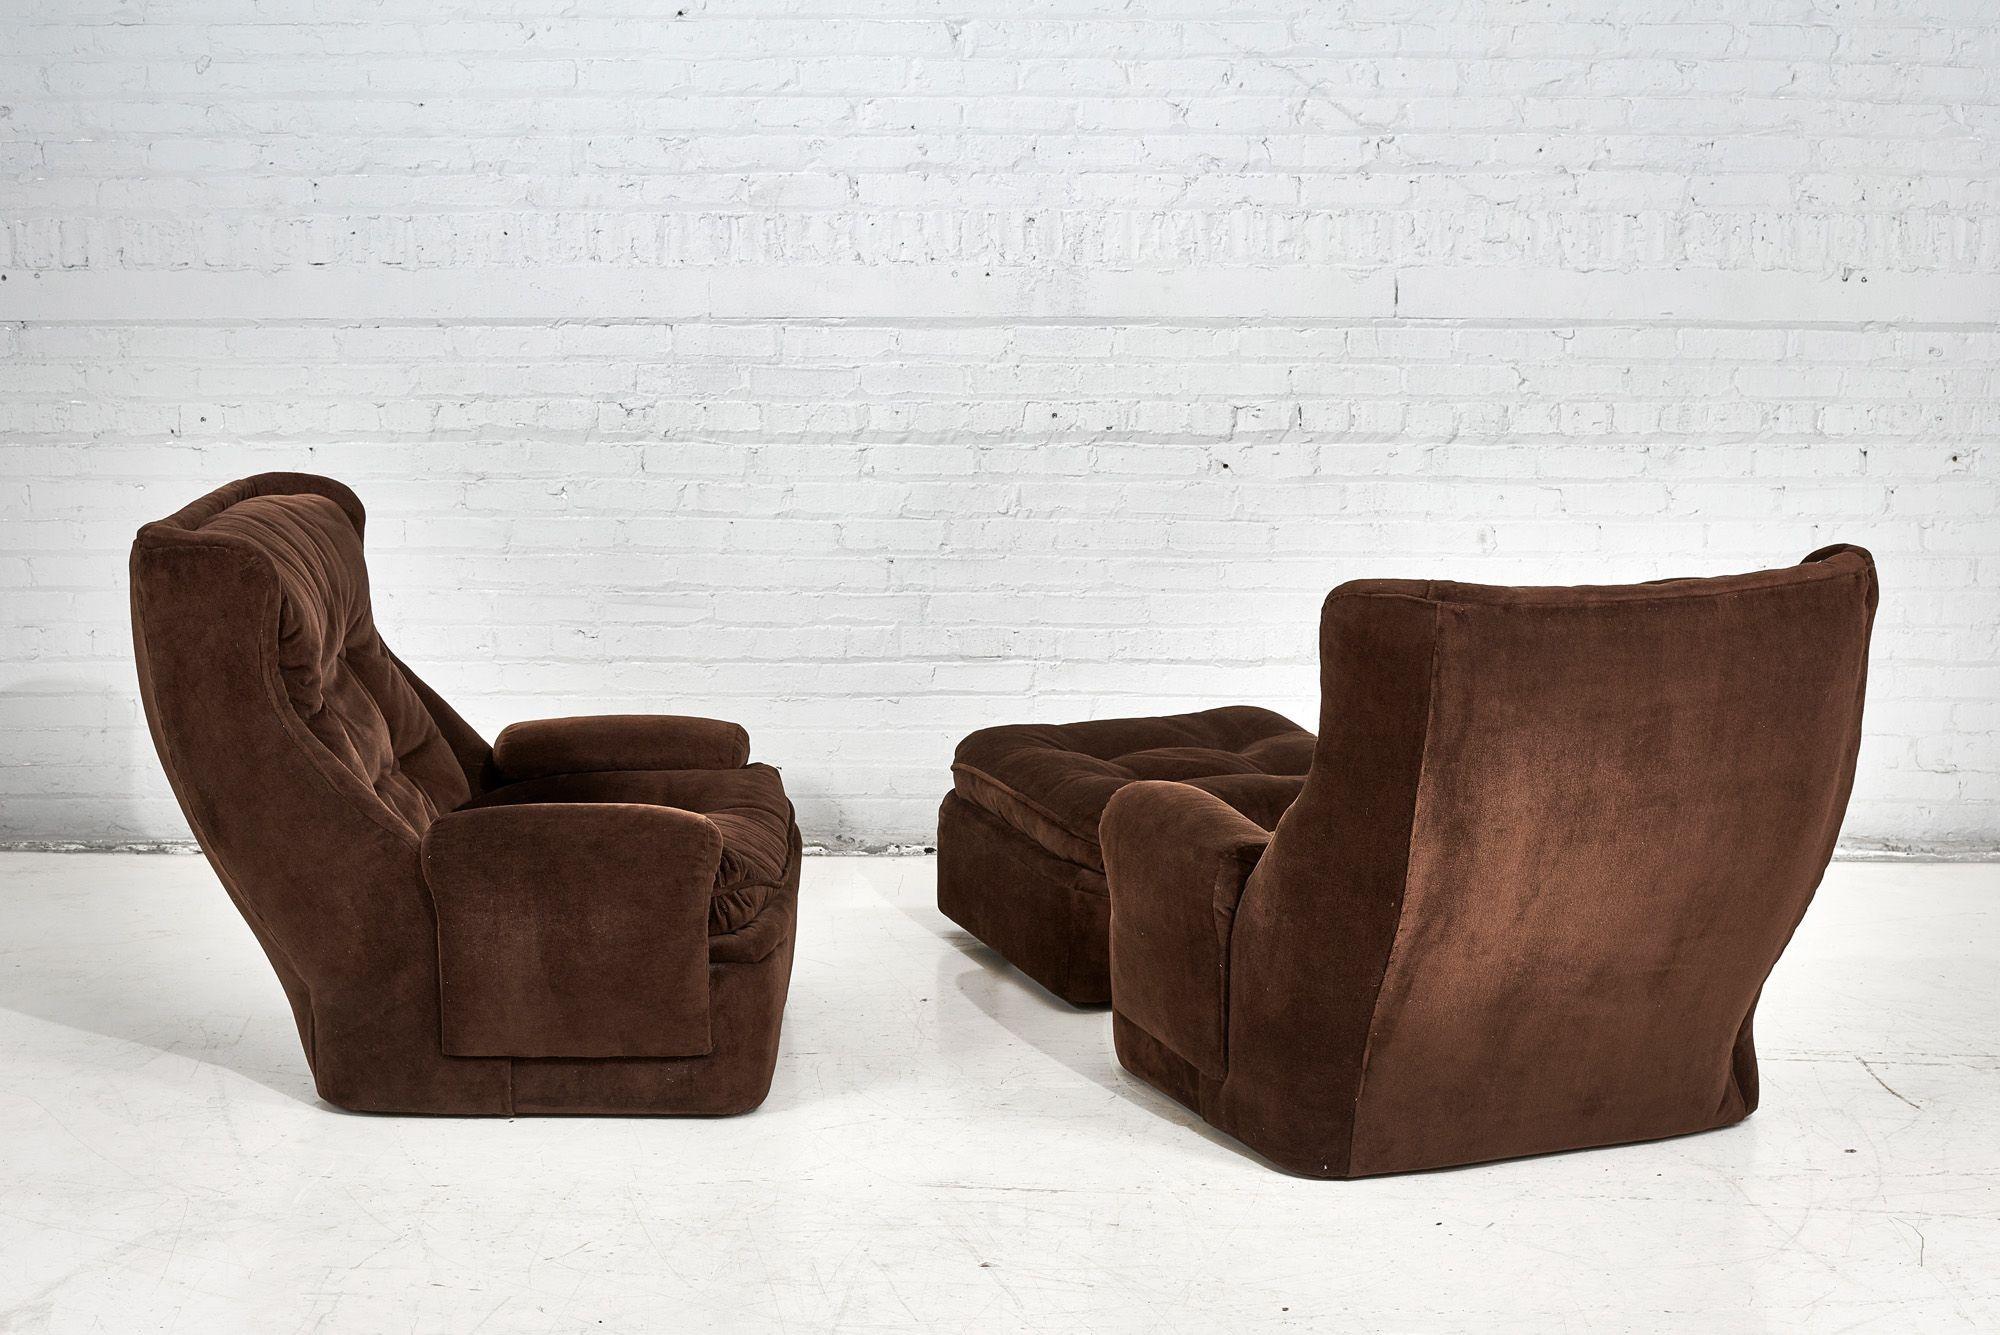 Orchidee Lounge Chairs by Michel Cadestin for Airborne with Ottoman France, 1968 For Sale 7